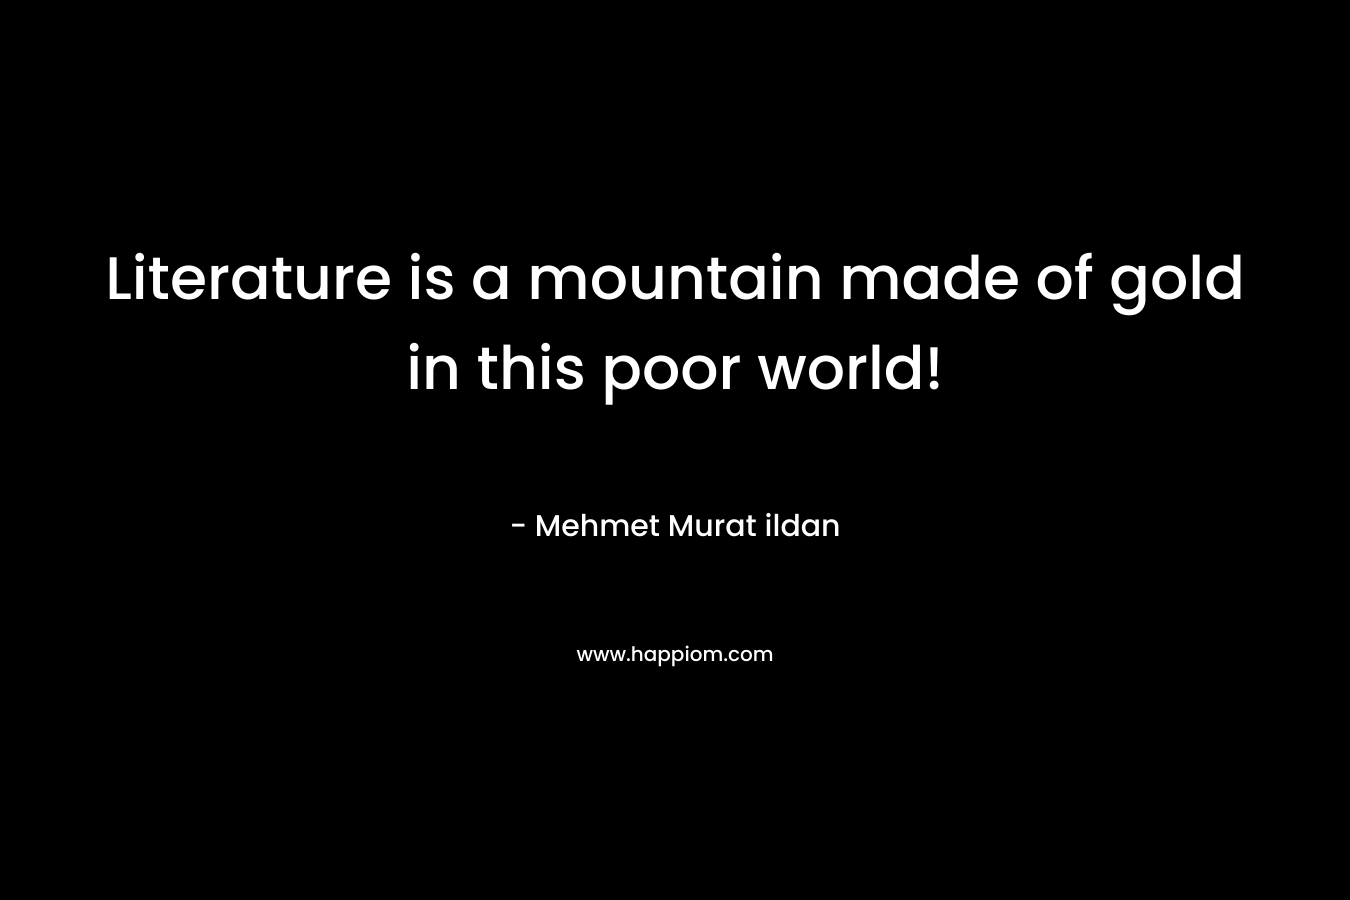 Literature is a mountain made of gold in this poor world! – Mehmet Murat ildan